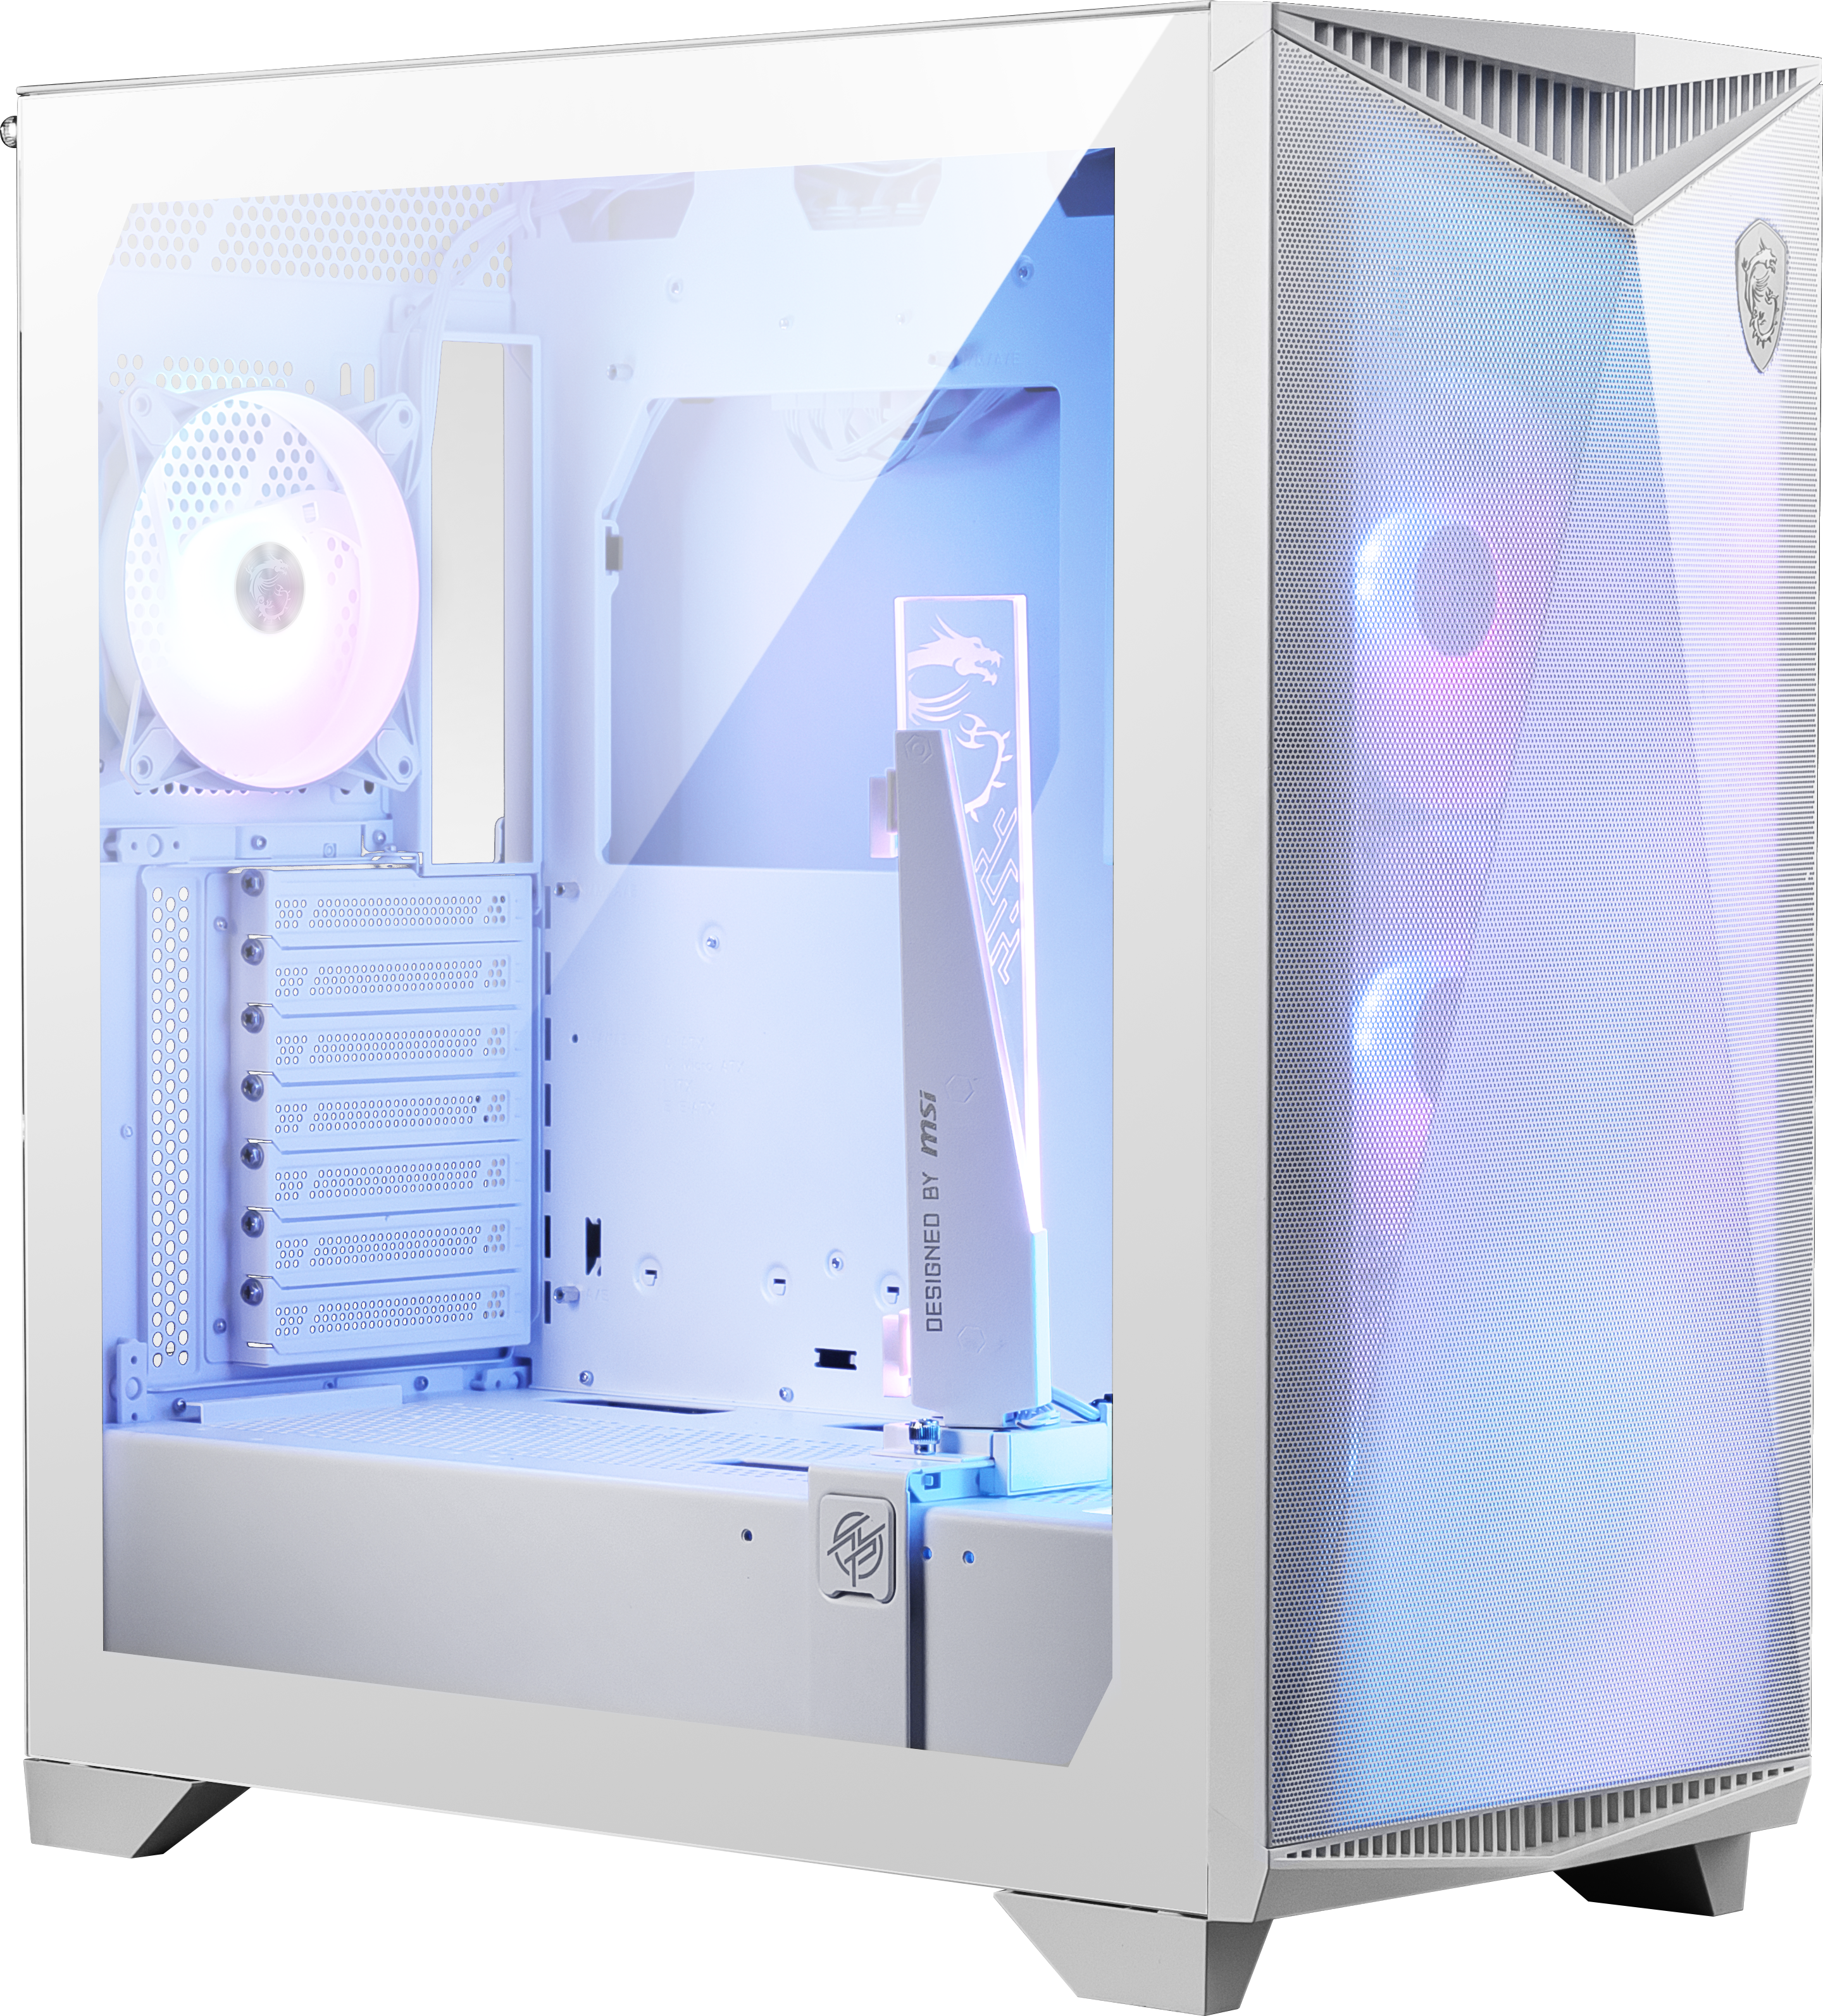  MSI MPG GUNGNIR 110R WHITE - Premium Mid-Tower Gaming PC Case -  Tempered Glass Side Panel - ARGB 120mm Fans - Liquid Cooling Support up to  360mm Radiator - White Color